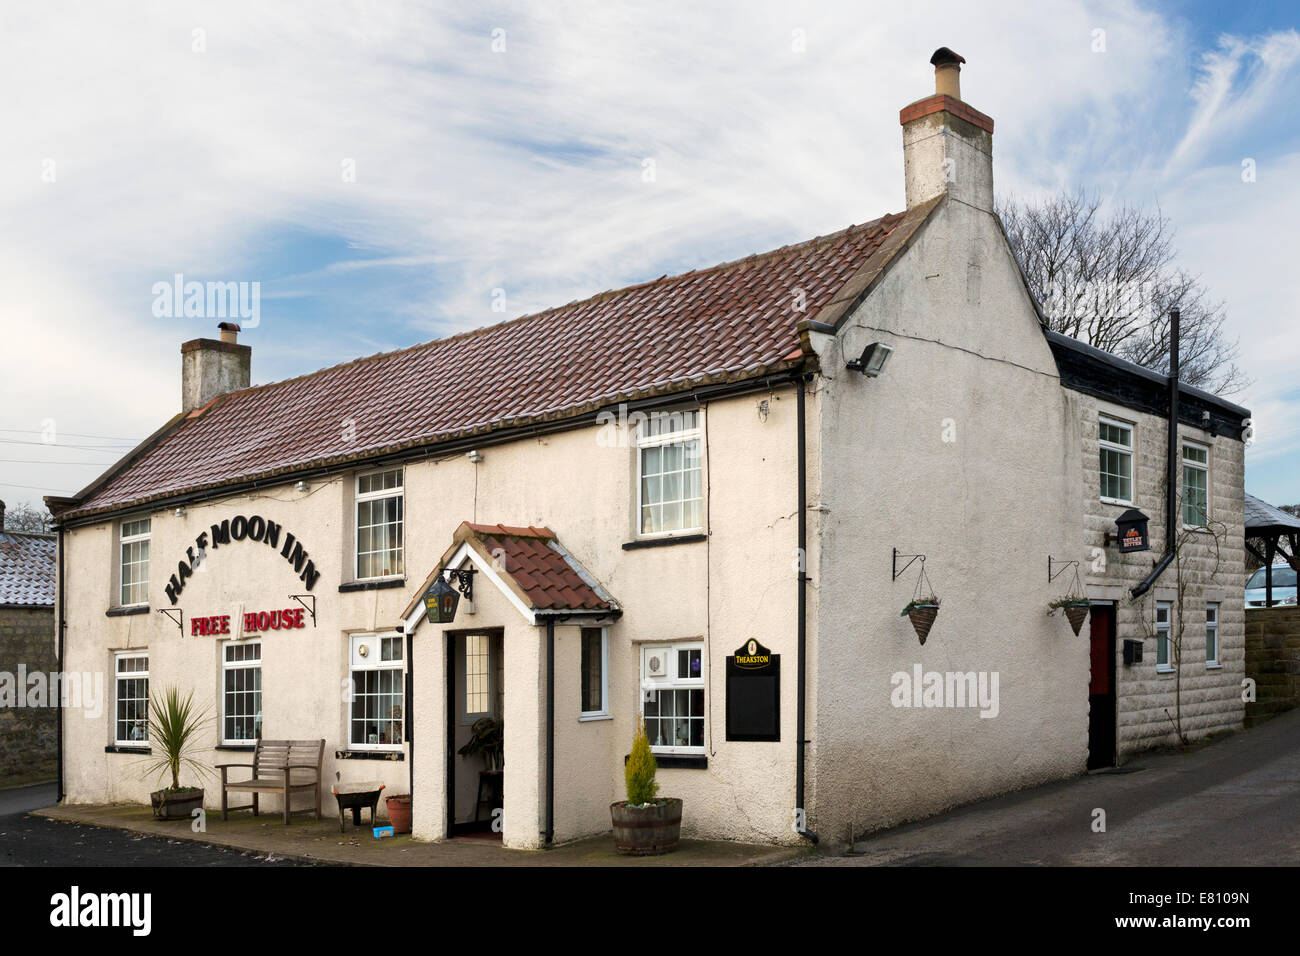 The Half Moon Inn at Acklam in east Yorkshire Stock Photo